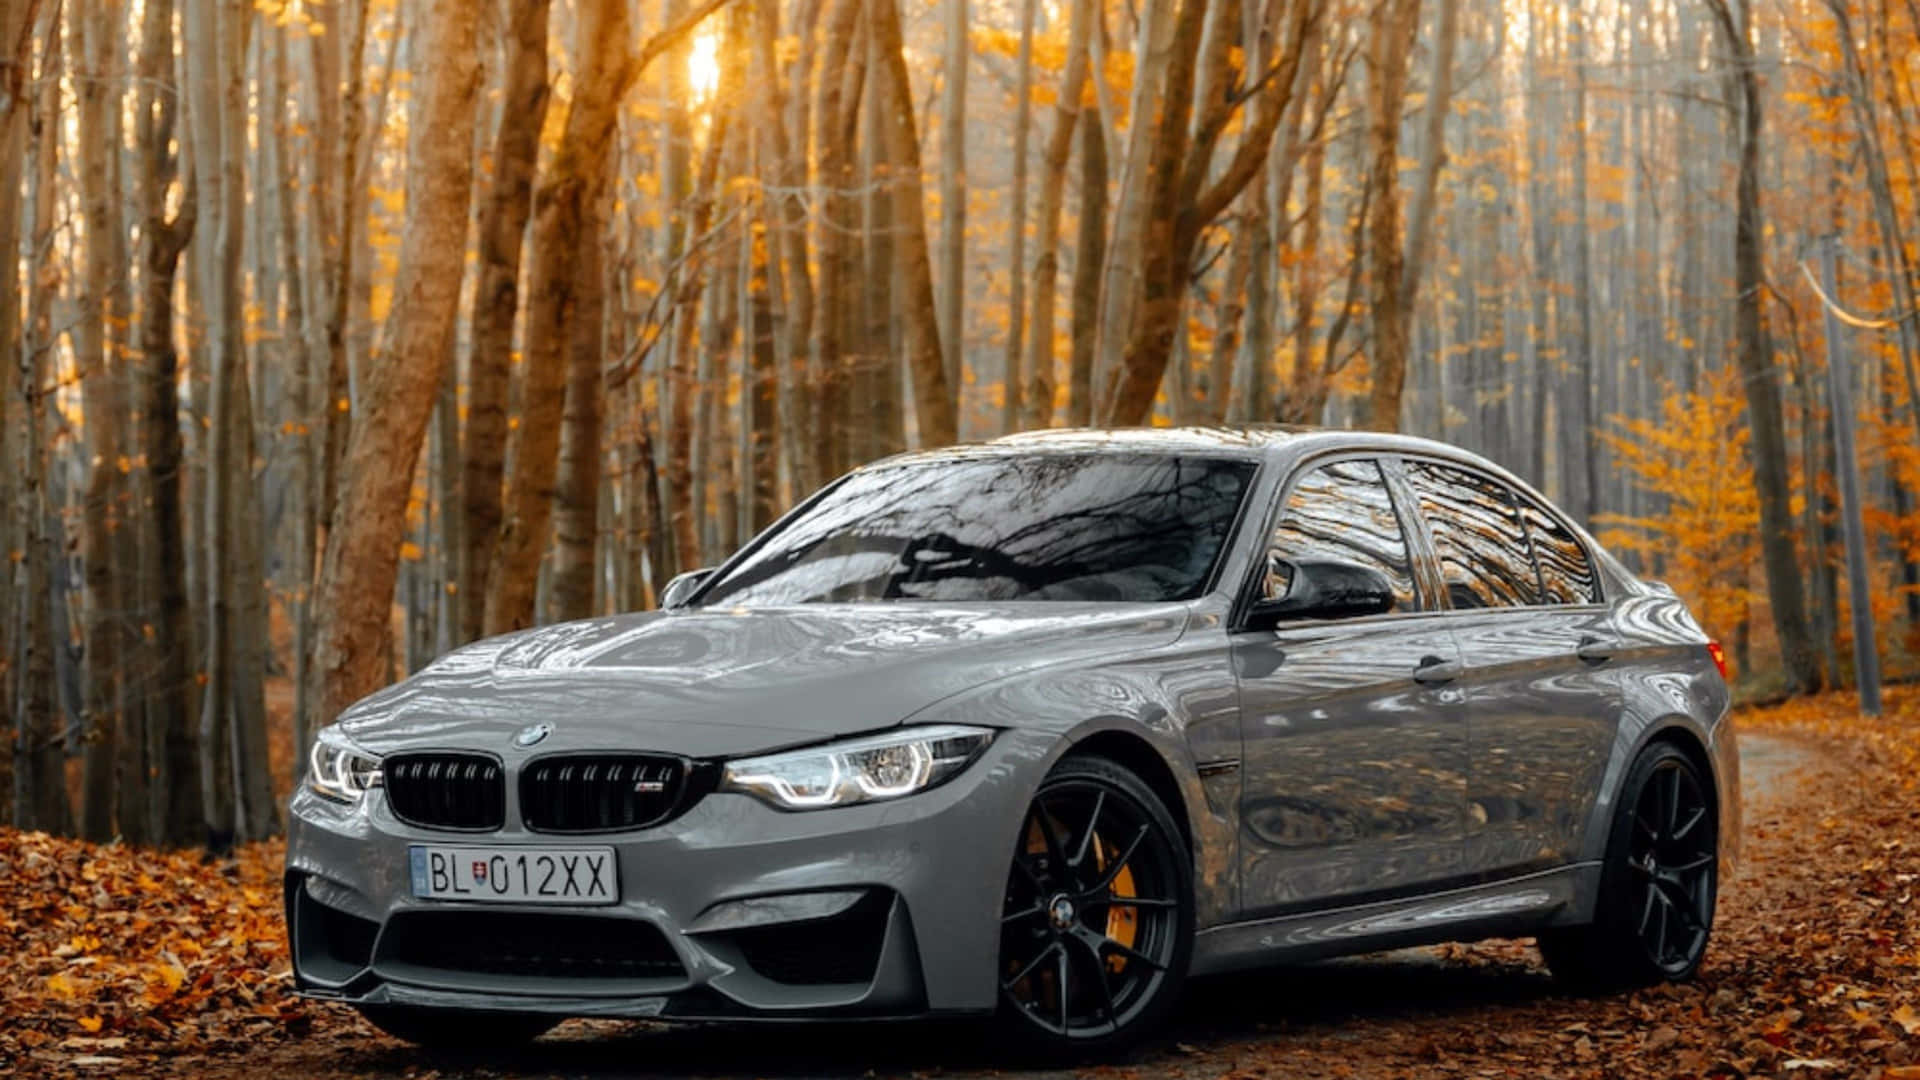 Experience the power of 4K behind the wheel of a BMW